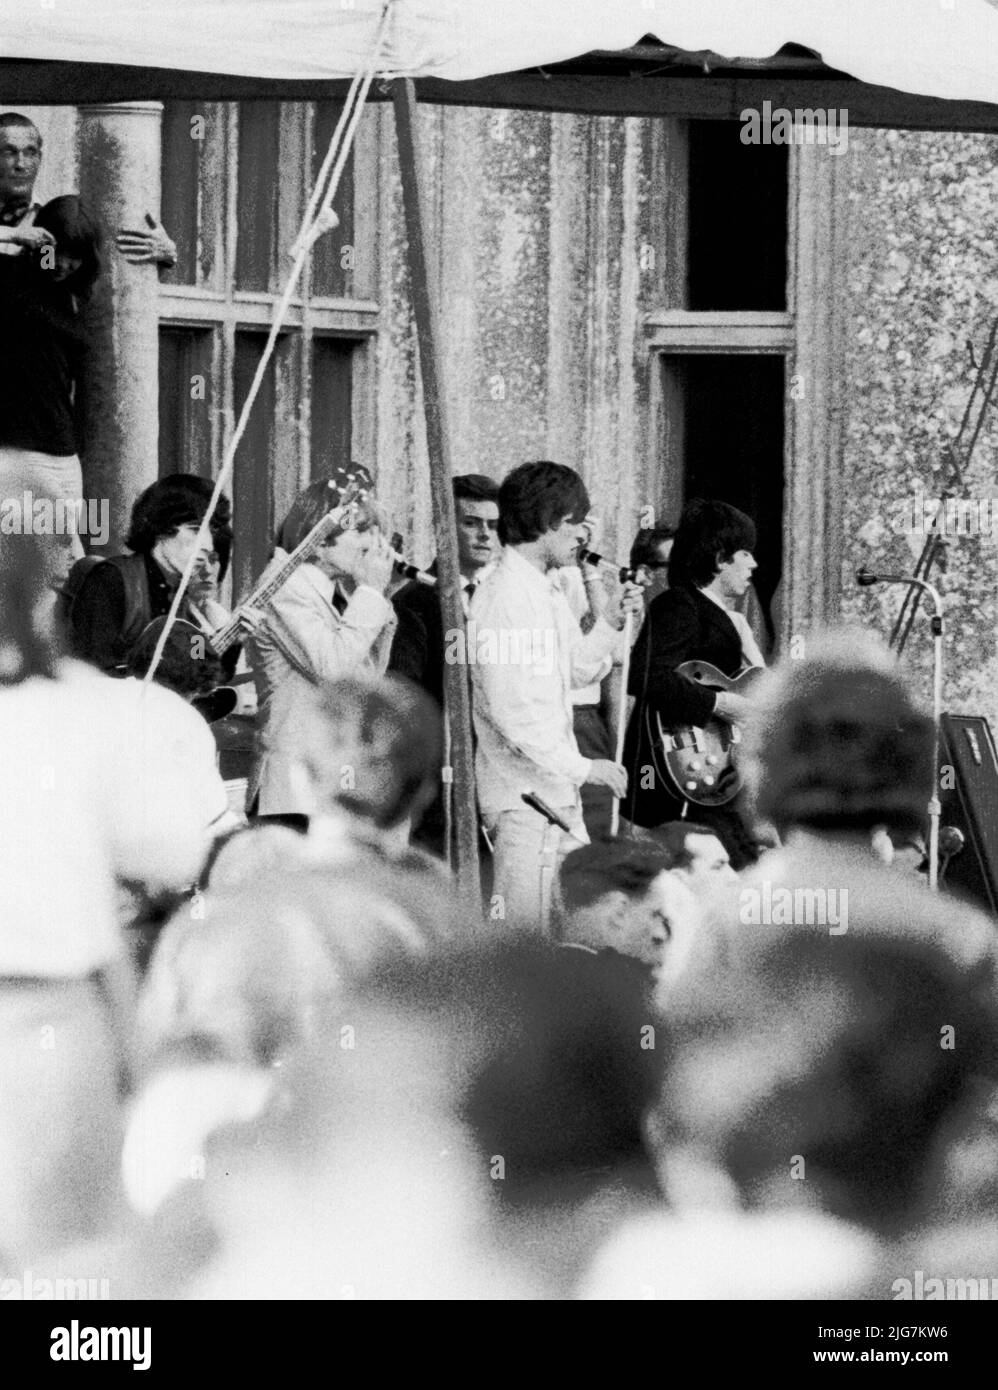 1964 a concert by the Rolling Stones held on the front steps of Longleat House in Wiltshire.Photos taken from among the crowd on black and white Kodak Stock Photo